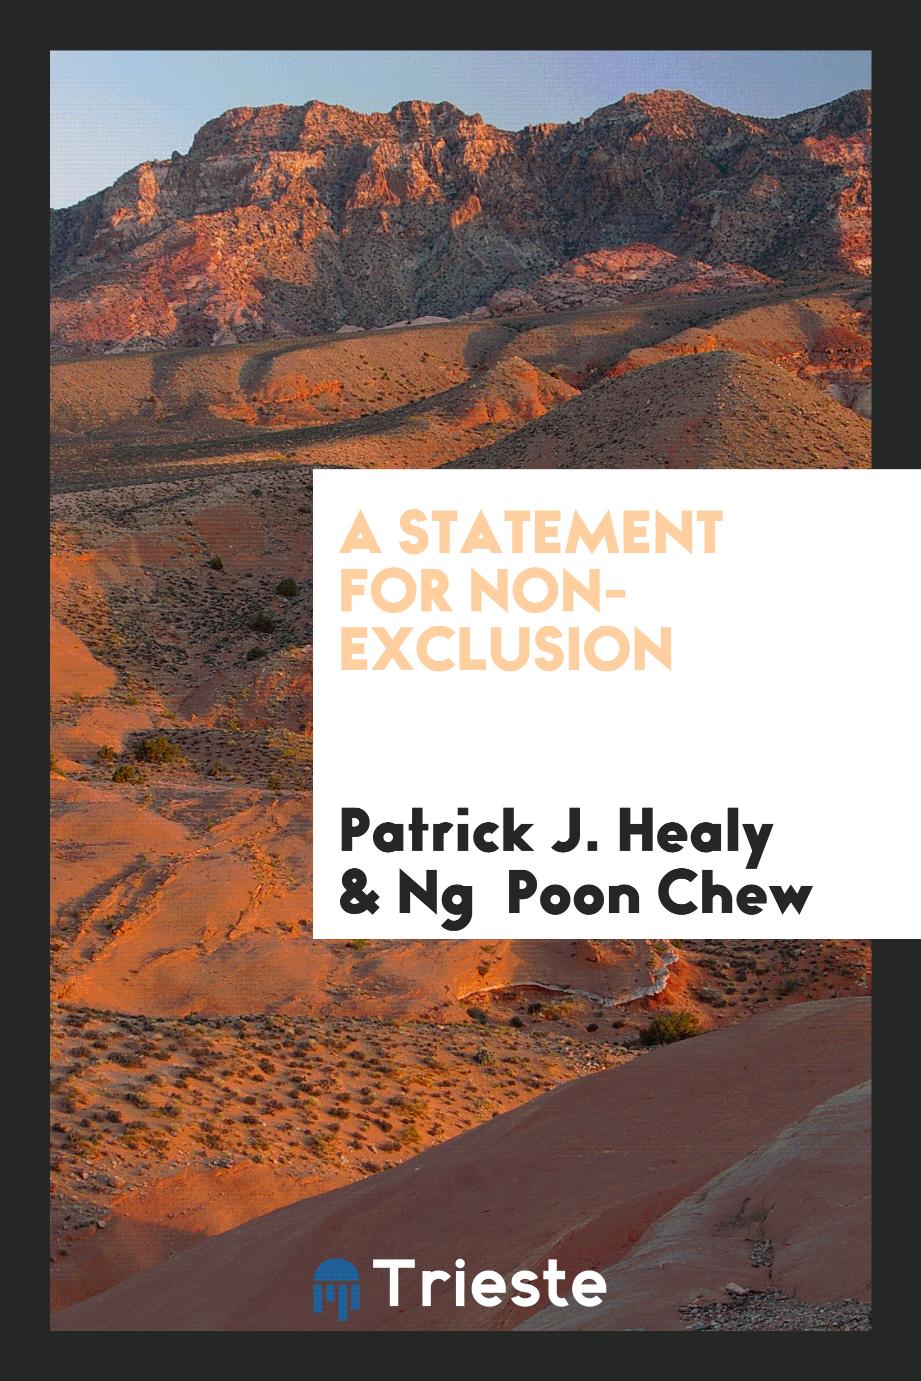 A statement for non-exclusion